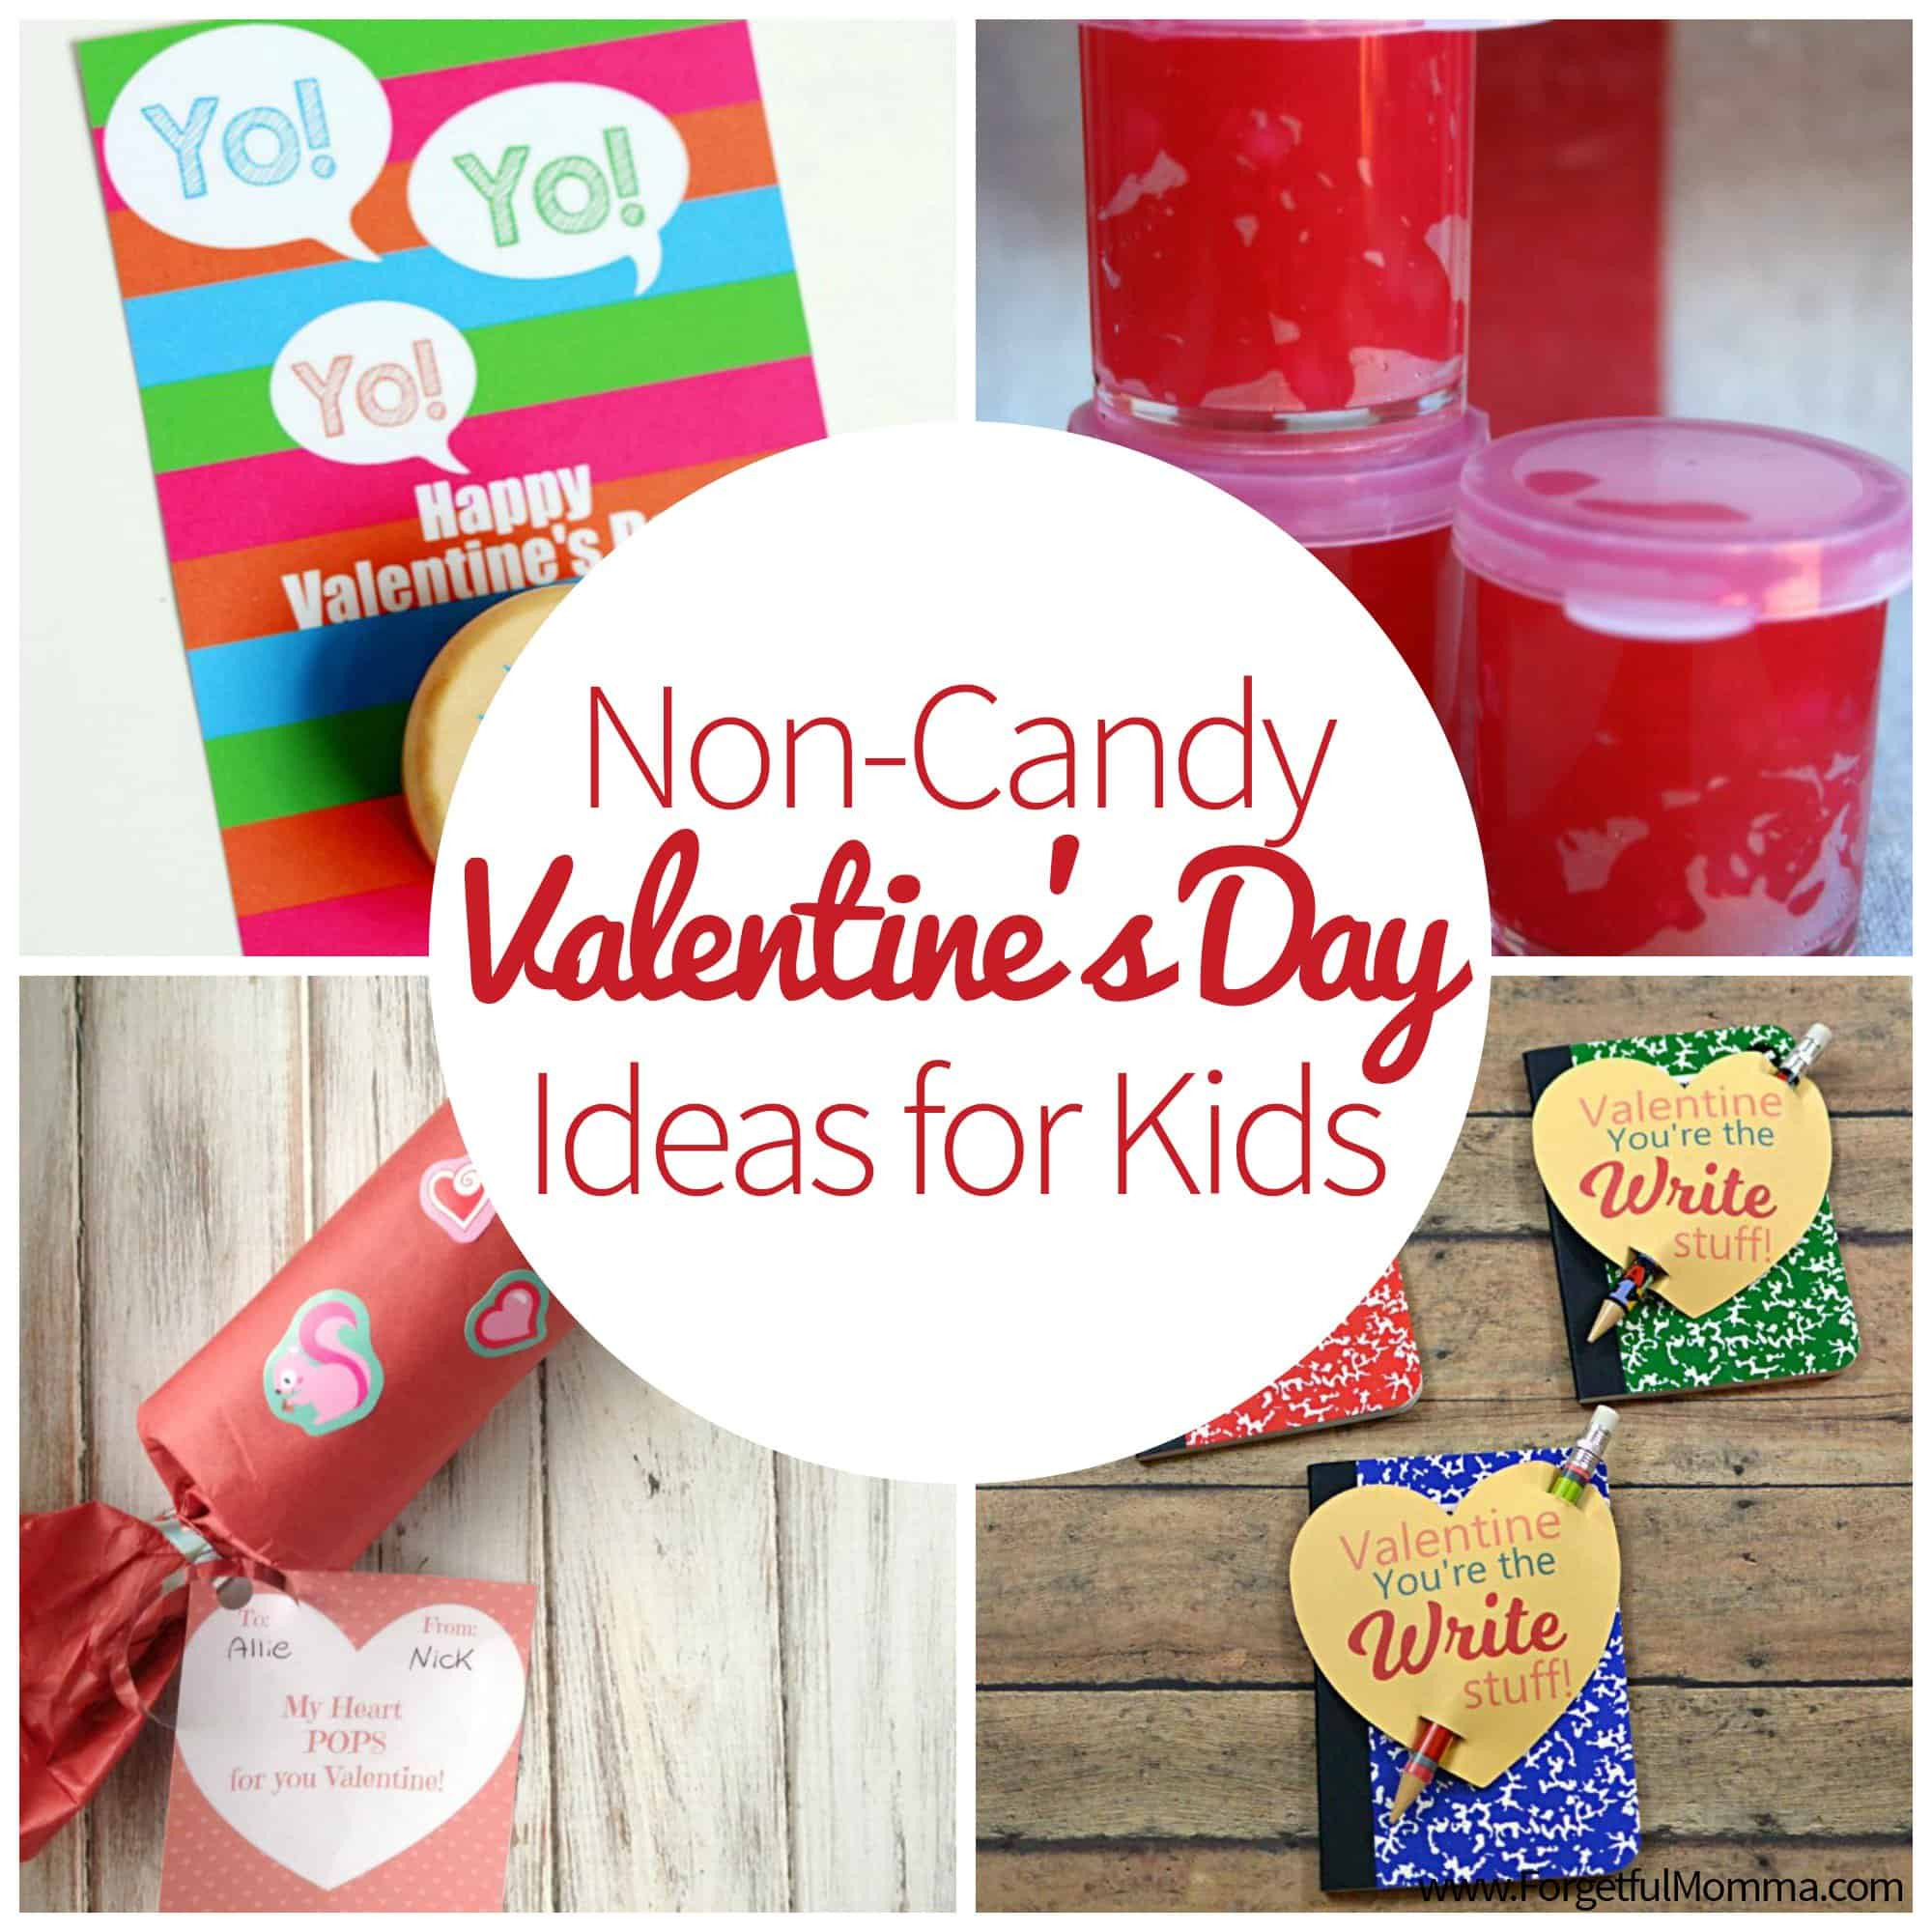 Valentine Gift Ideas For School
 Non Candy Valentine s Ideas for Kids to Take to School